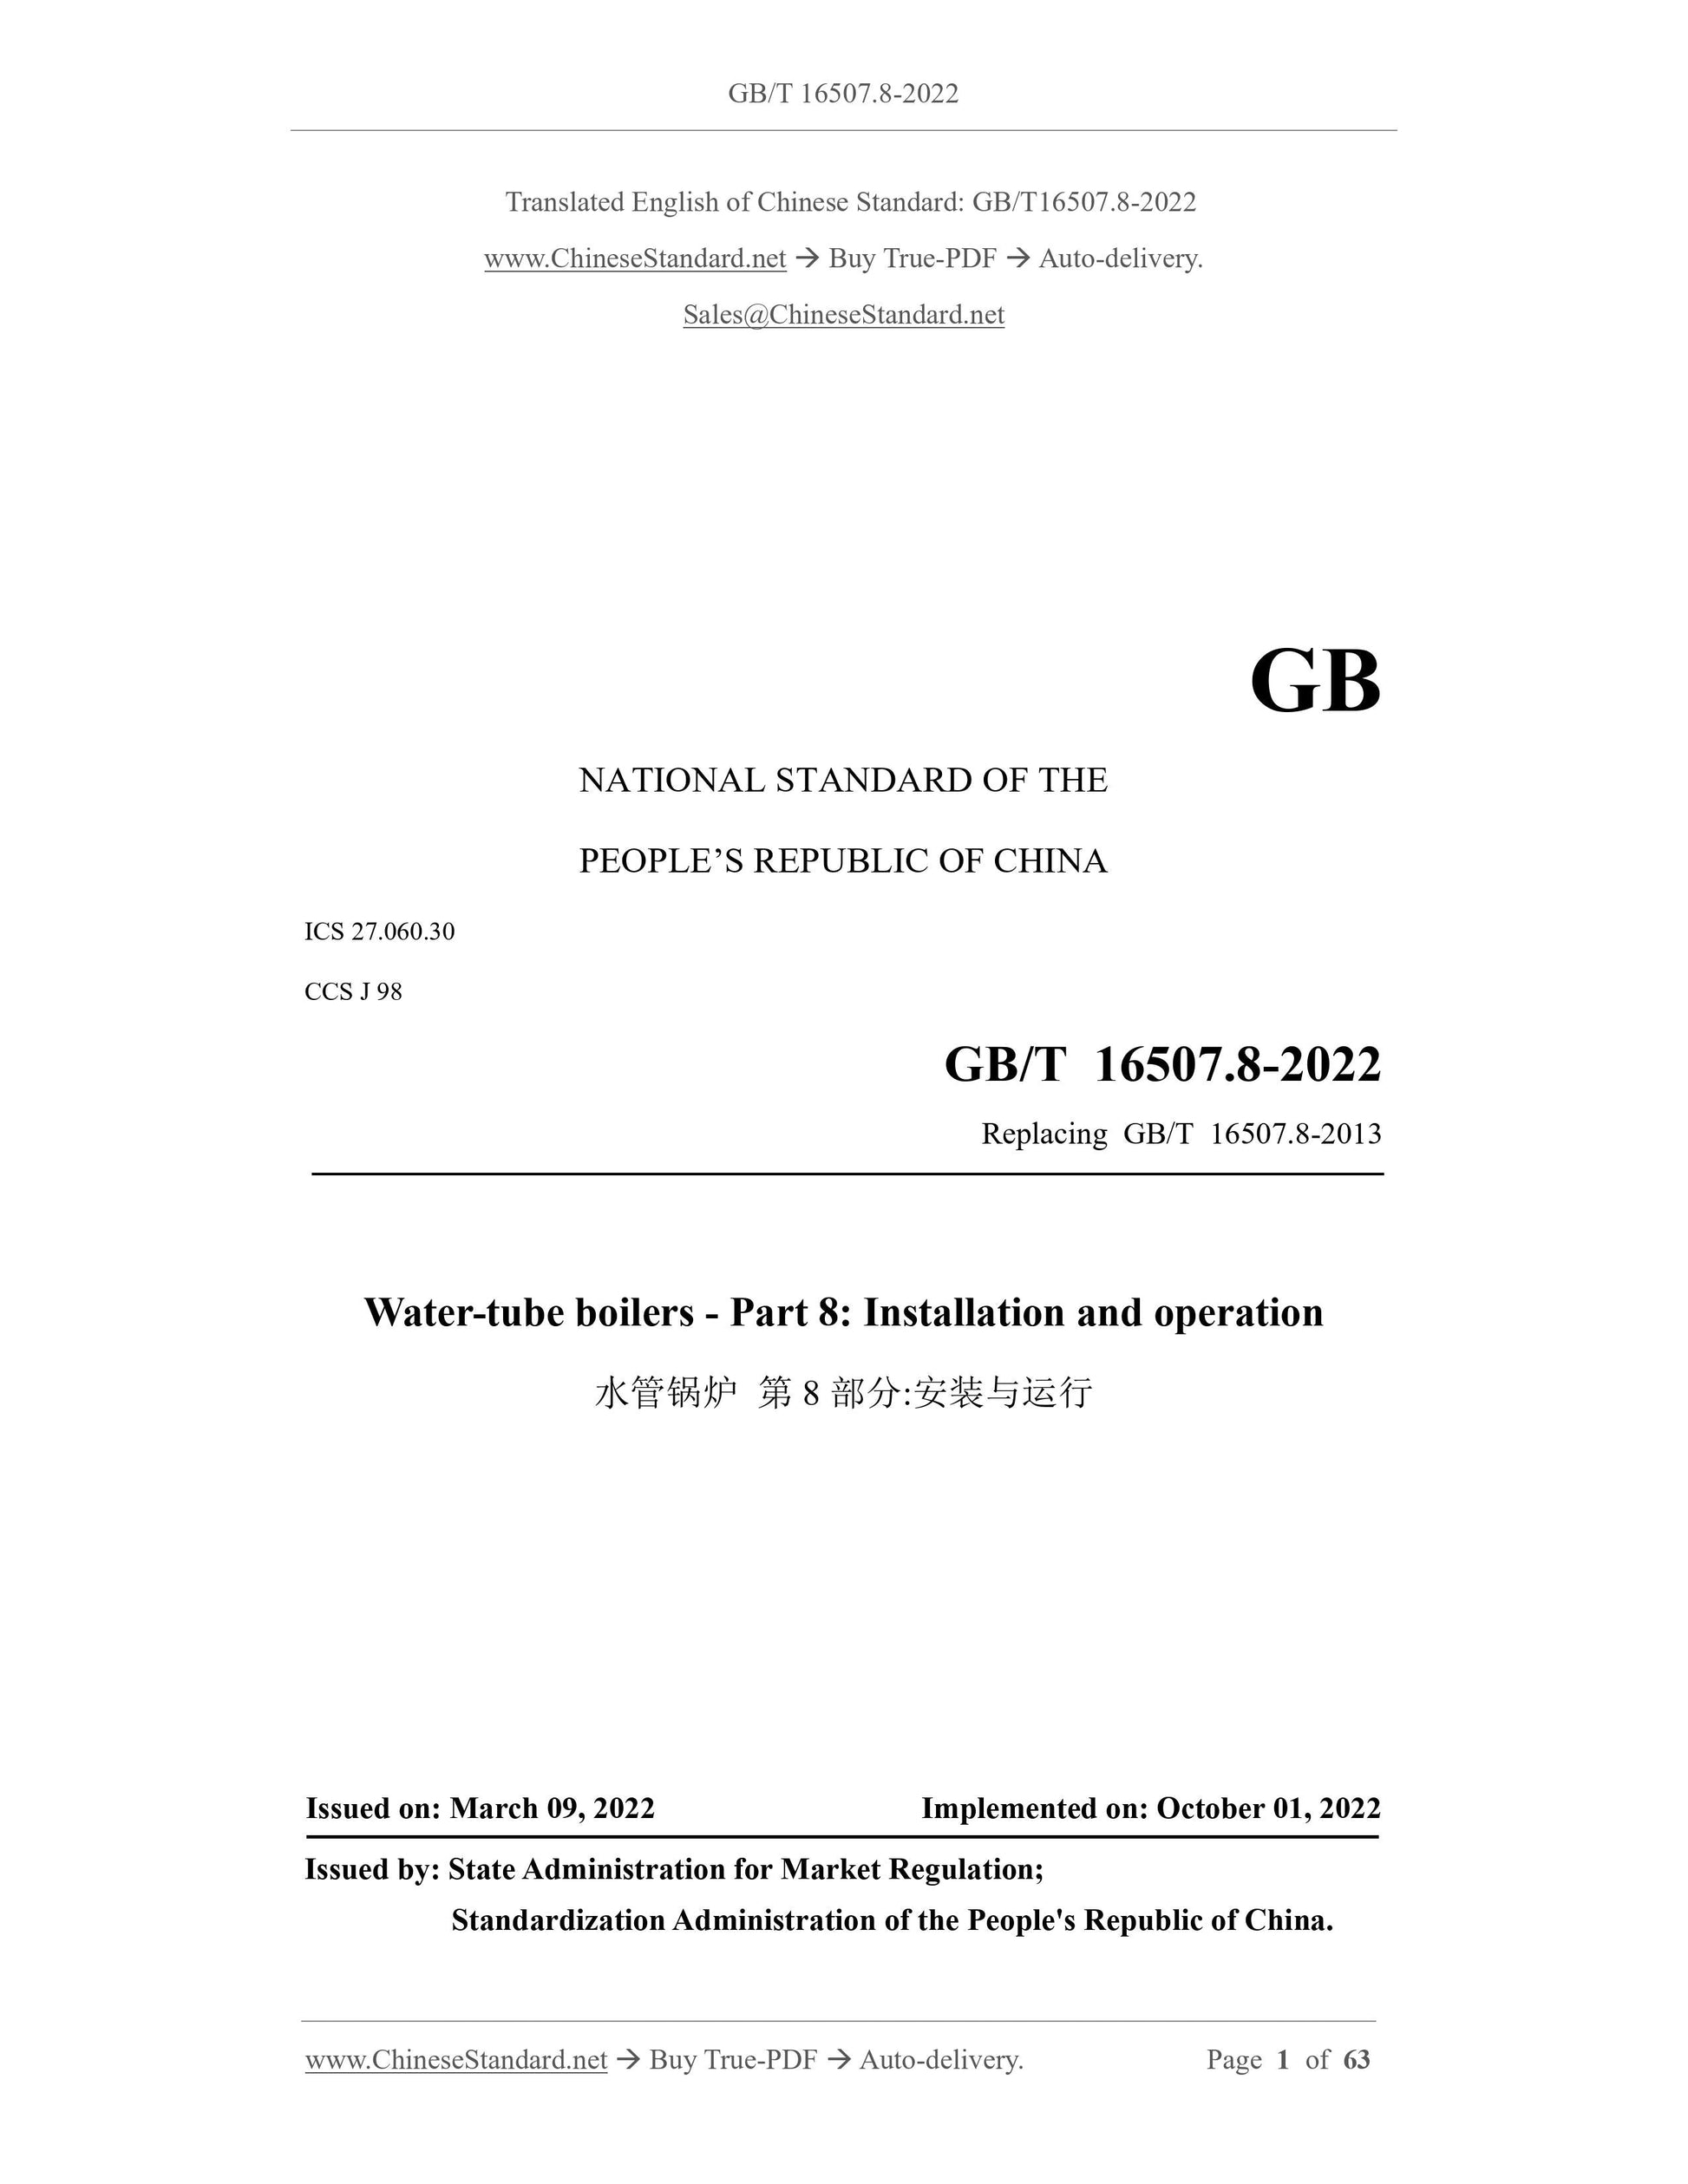 GB/T 16507.8-2022 Page 1